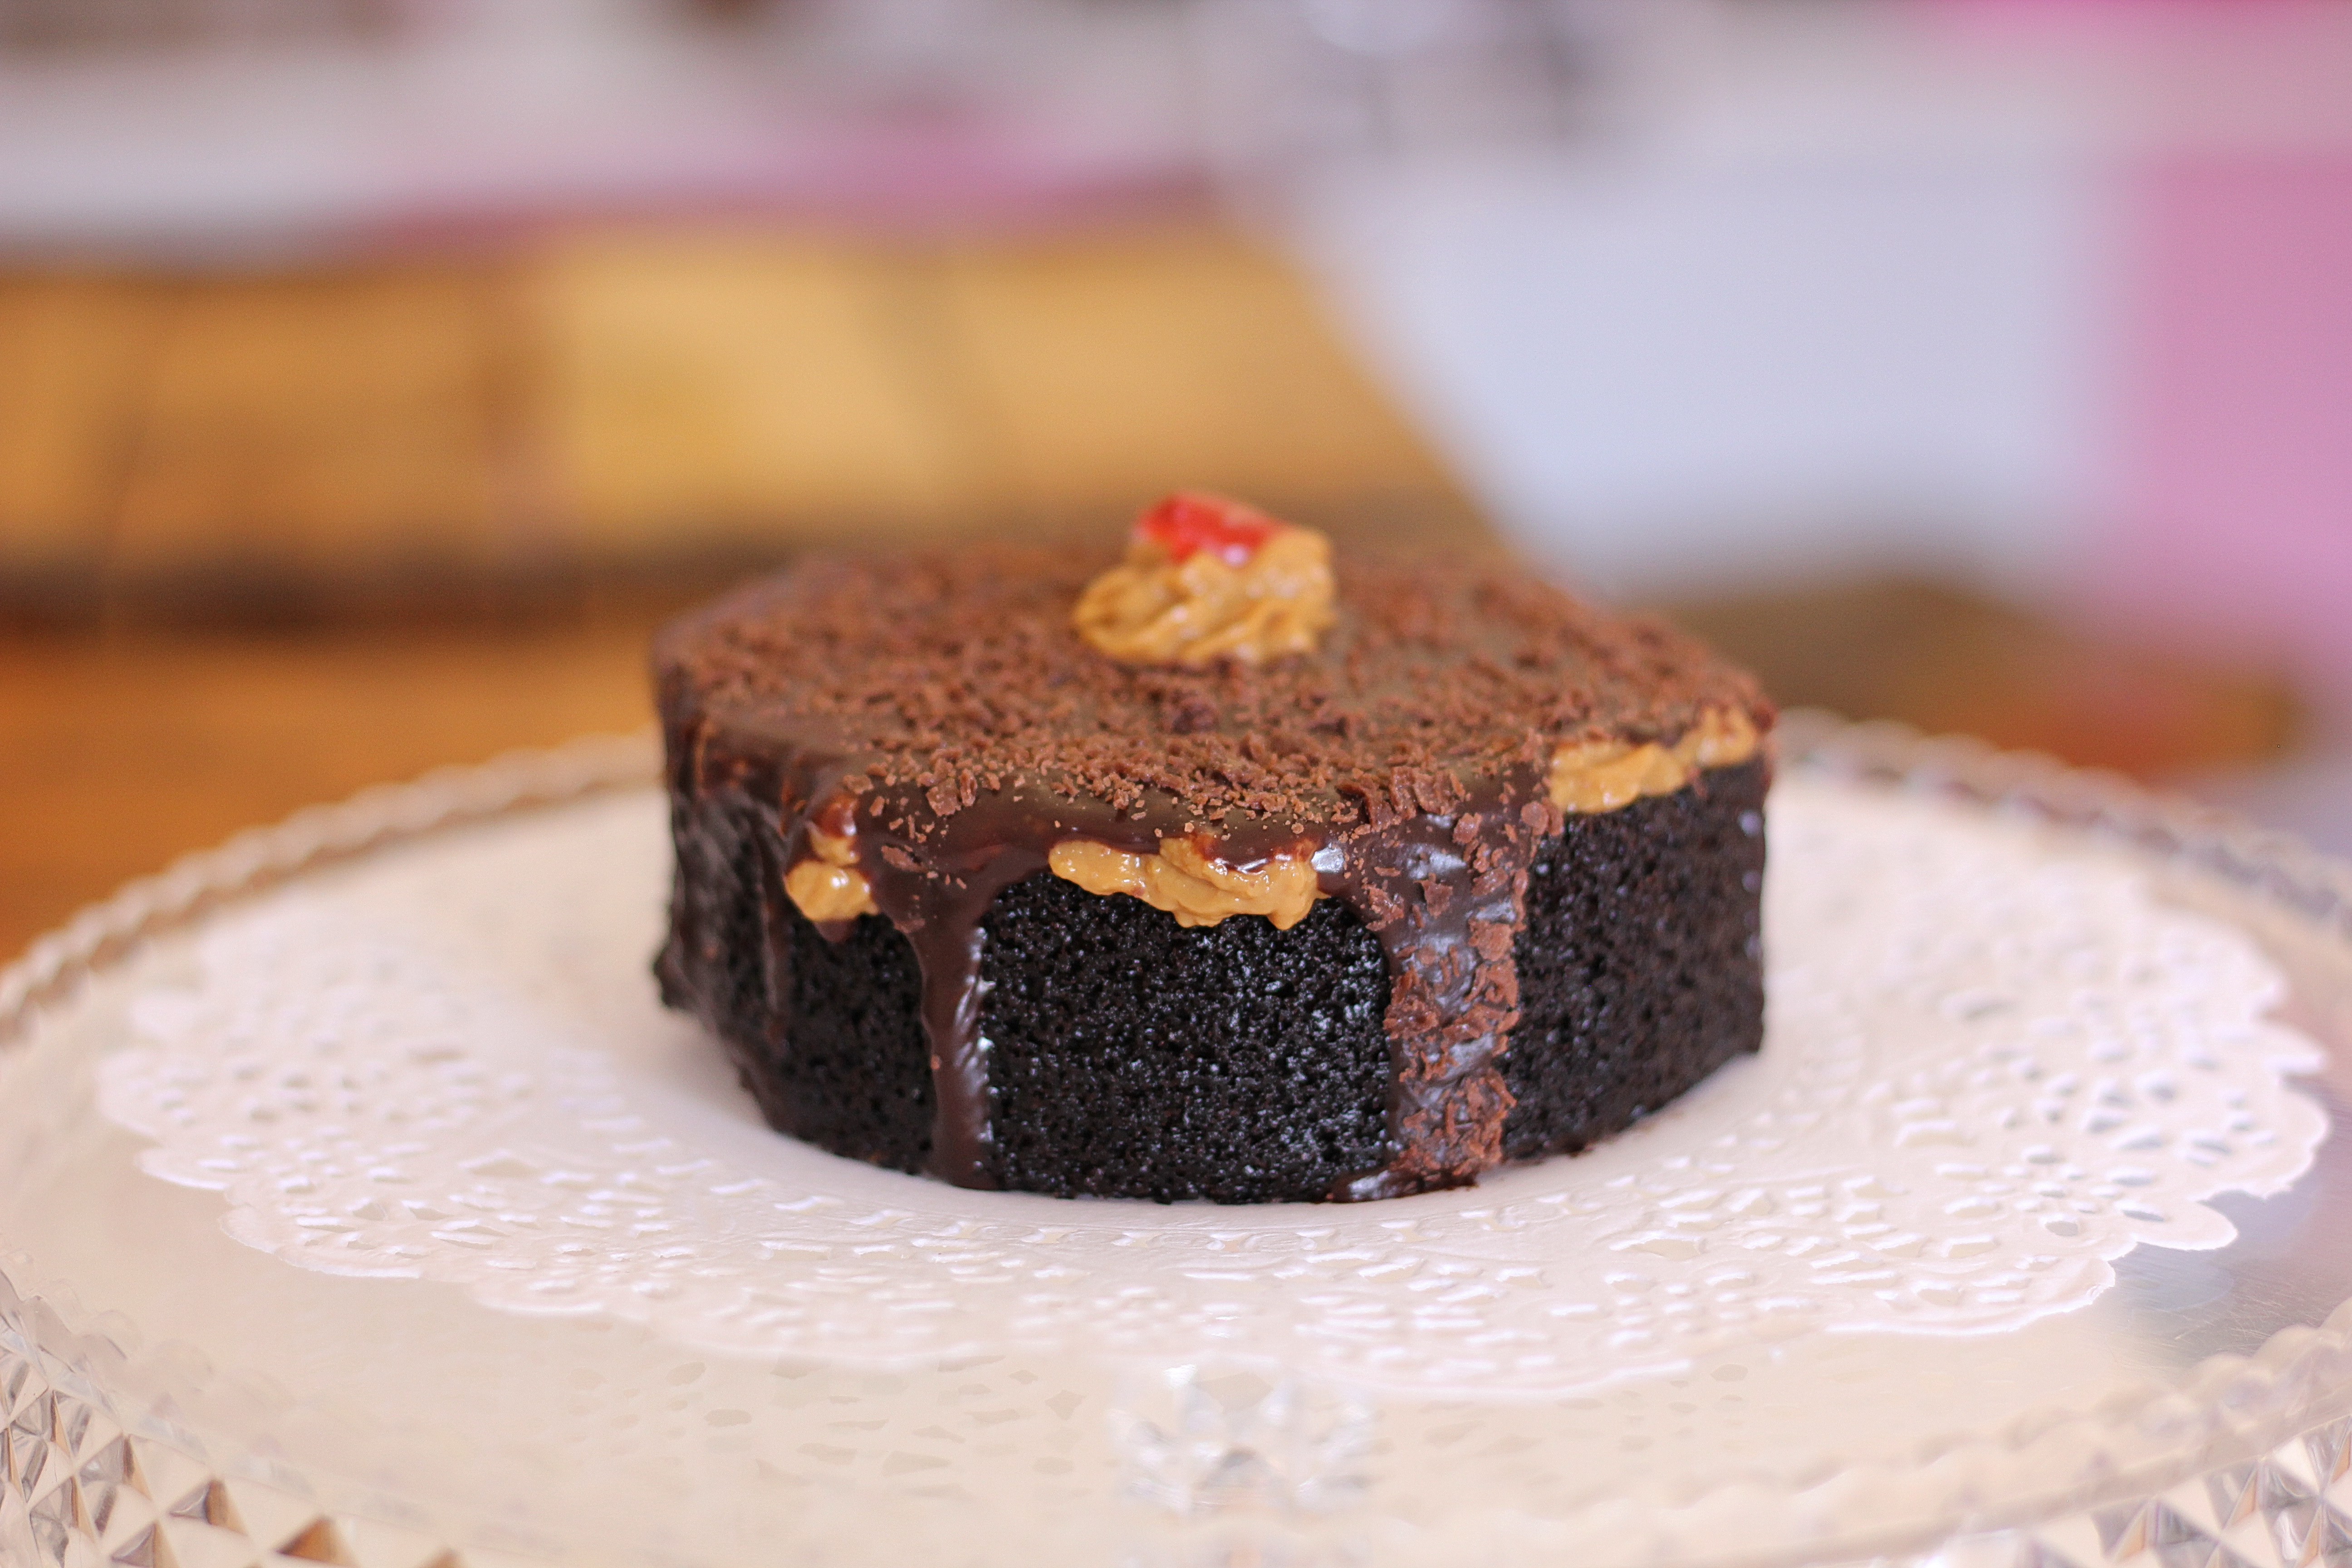 Small and intensely flavoured – the chocolate mudcake from D’licious. Image: Chris Marais